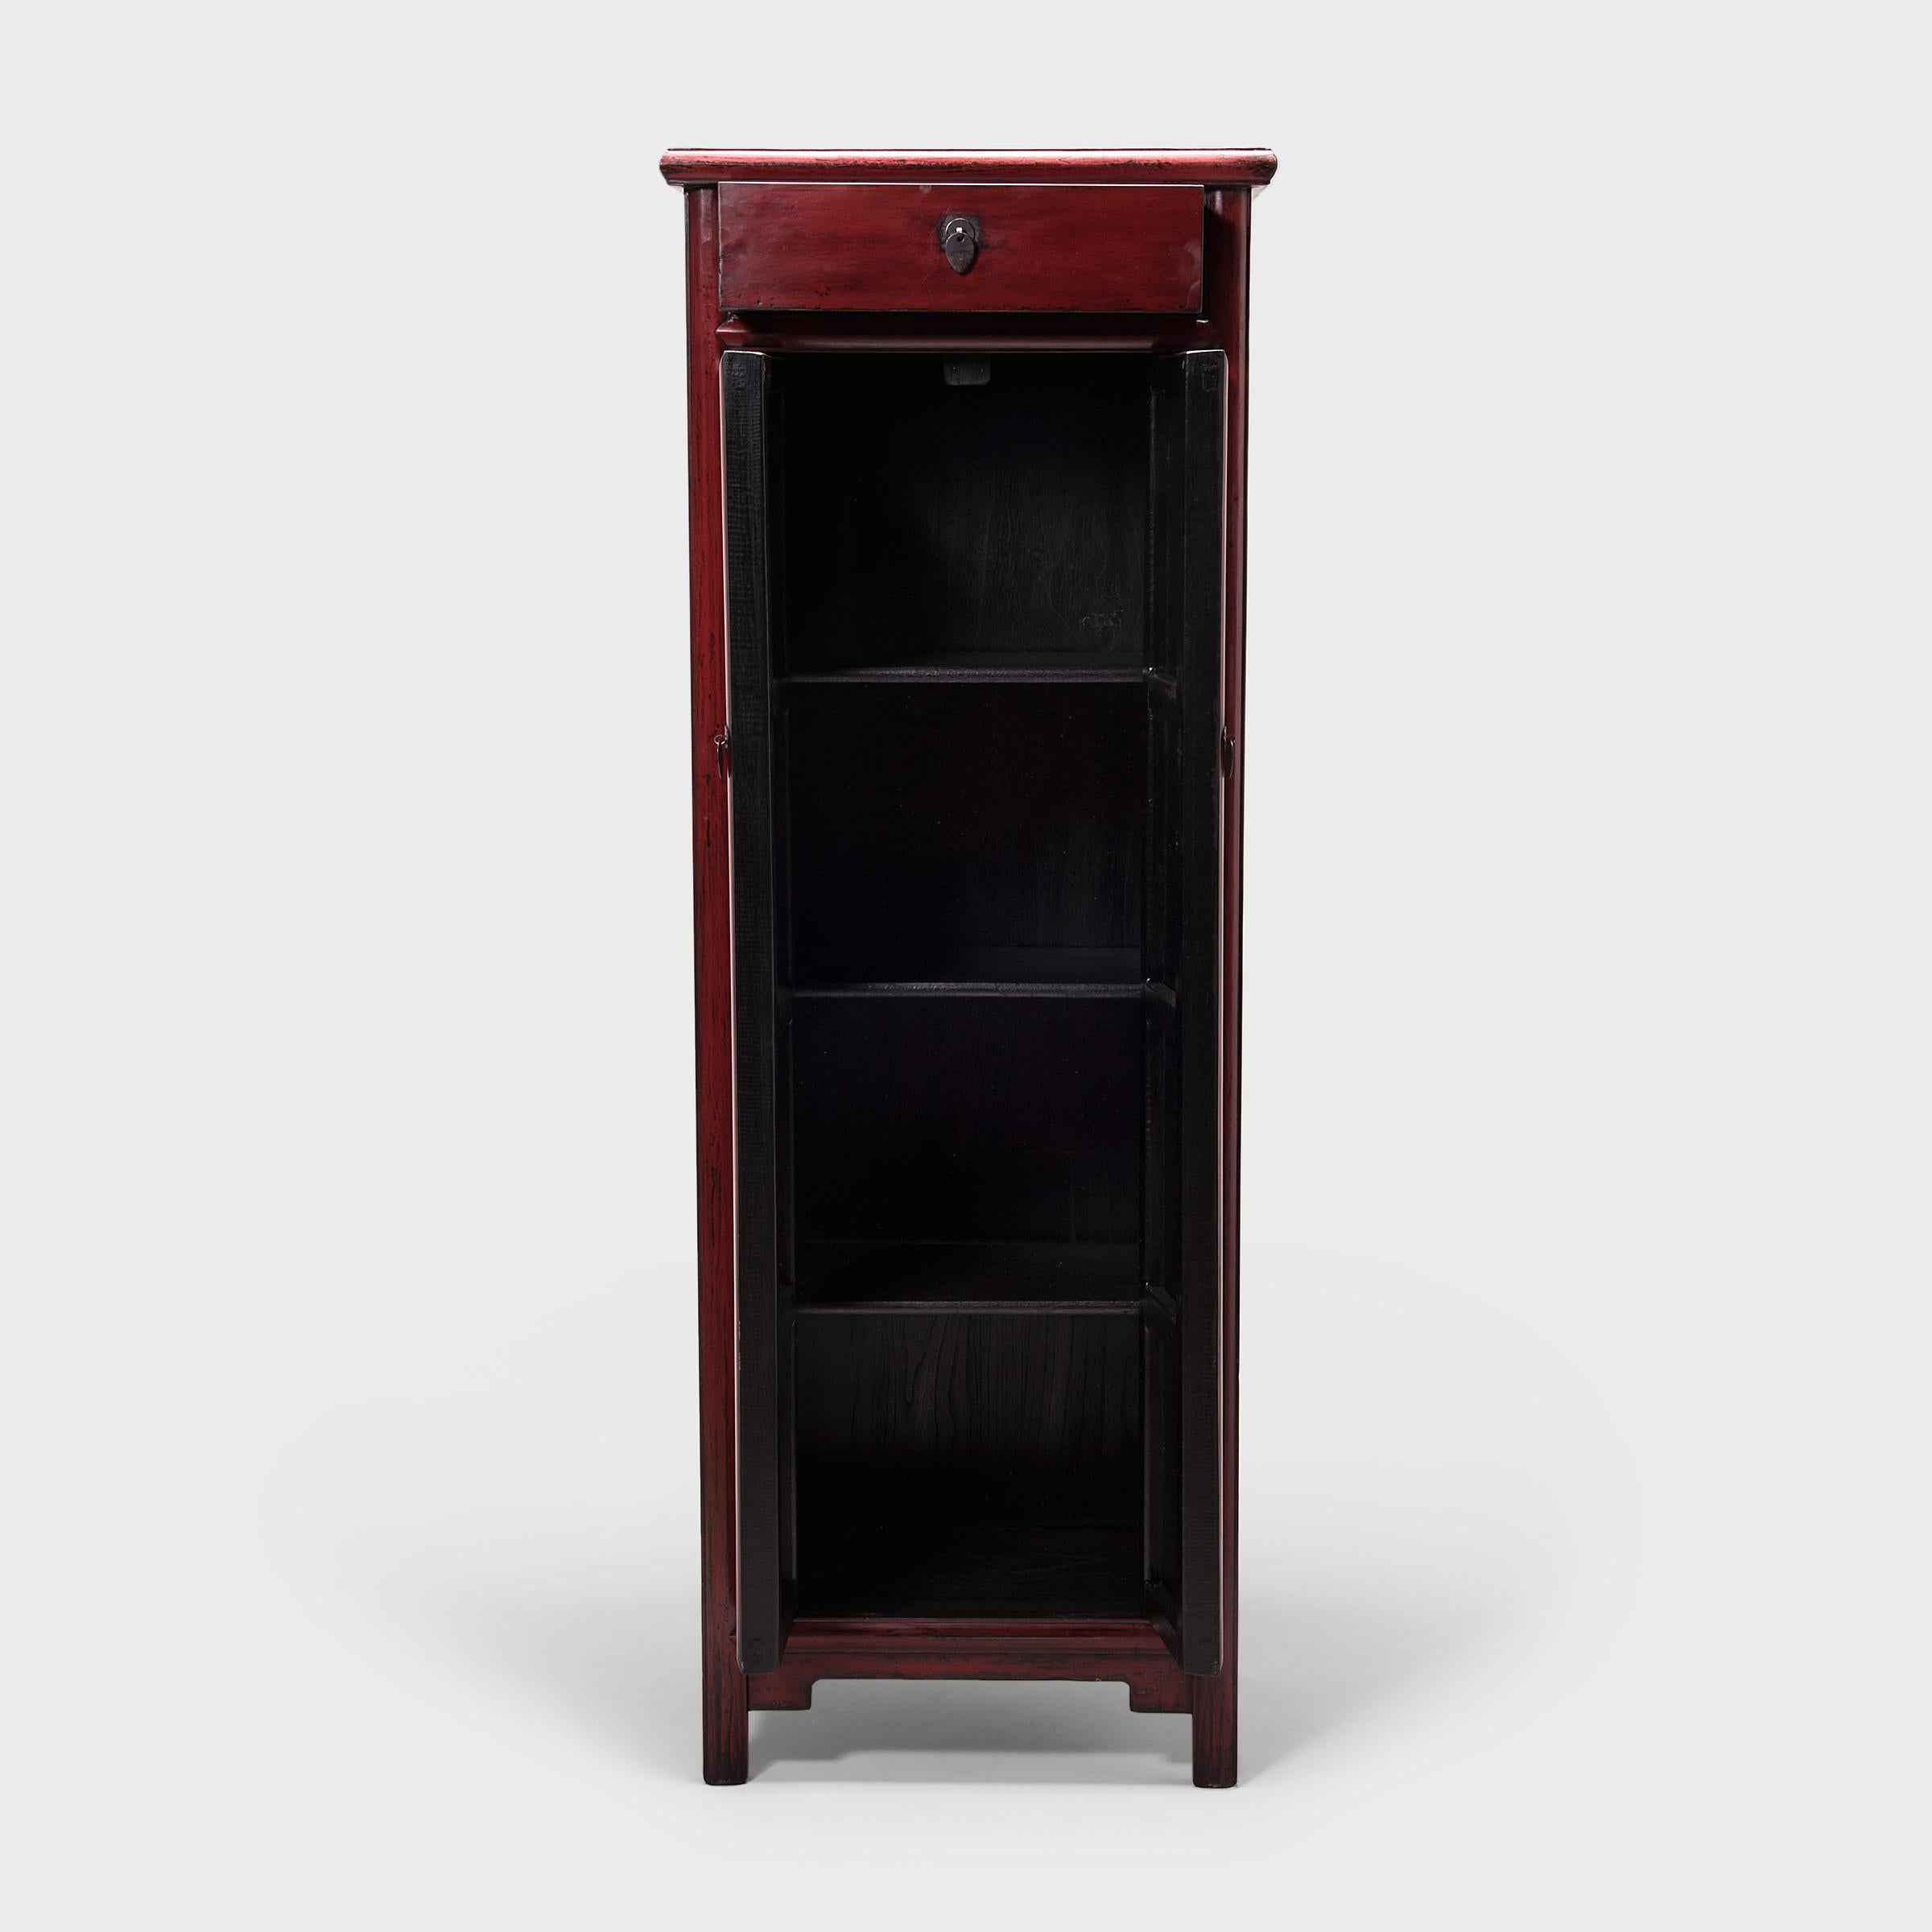 Constructed in China's Hebei province, this early 20th century noodle cabinet is unusual for its tall, narrow stature. Known as a “noodle cabinet” for the rounded wood molding that outlines its doors, the cabinet has a timeless design, with clean